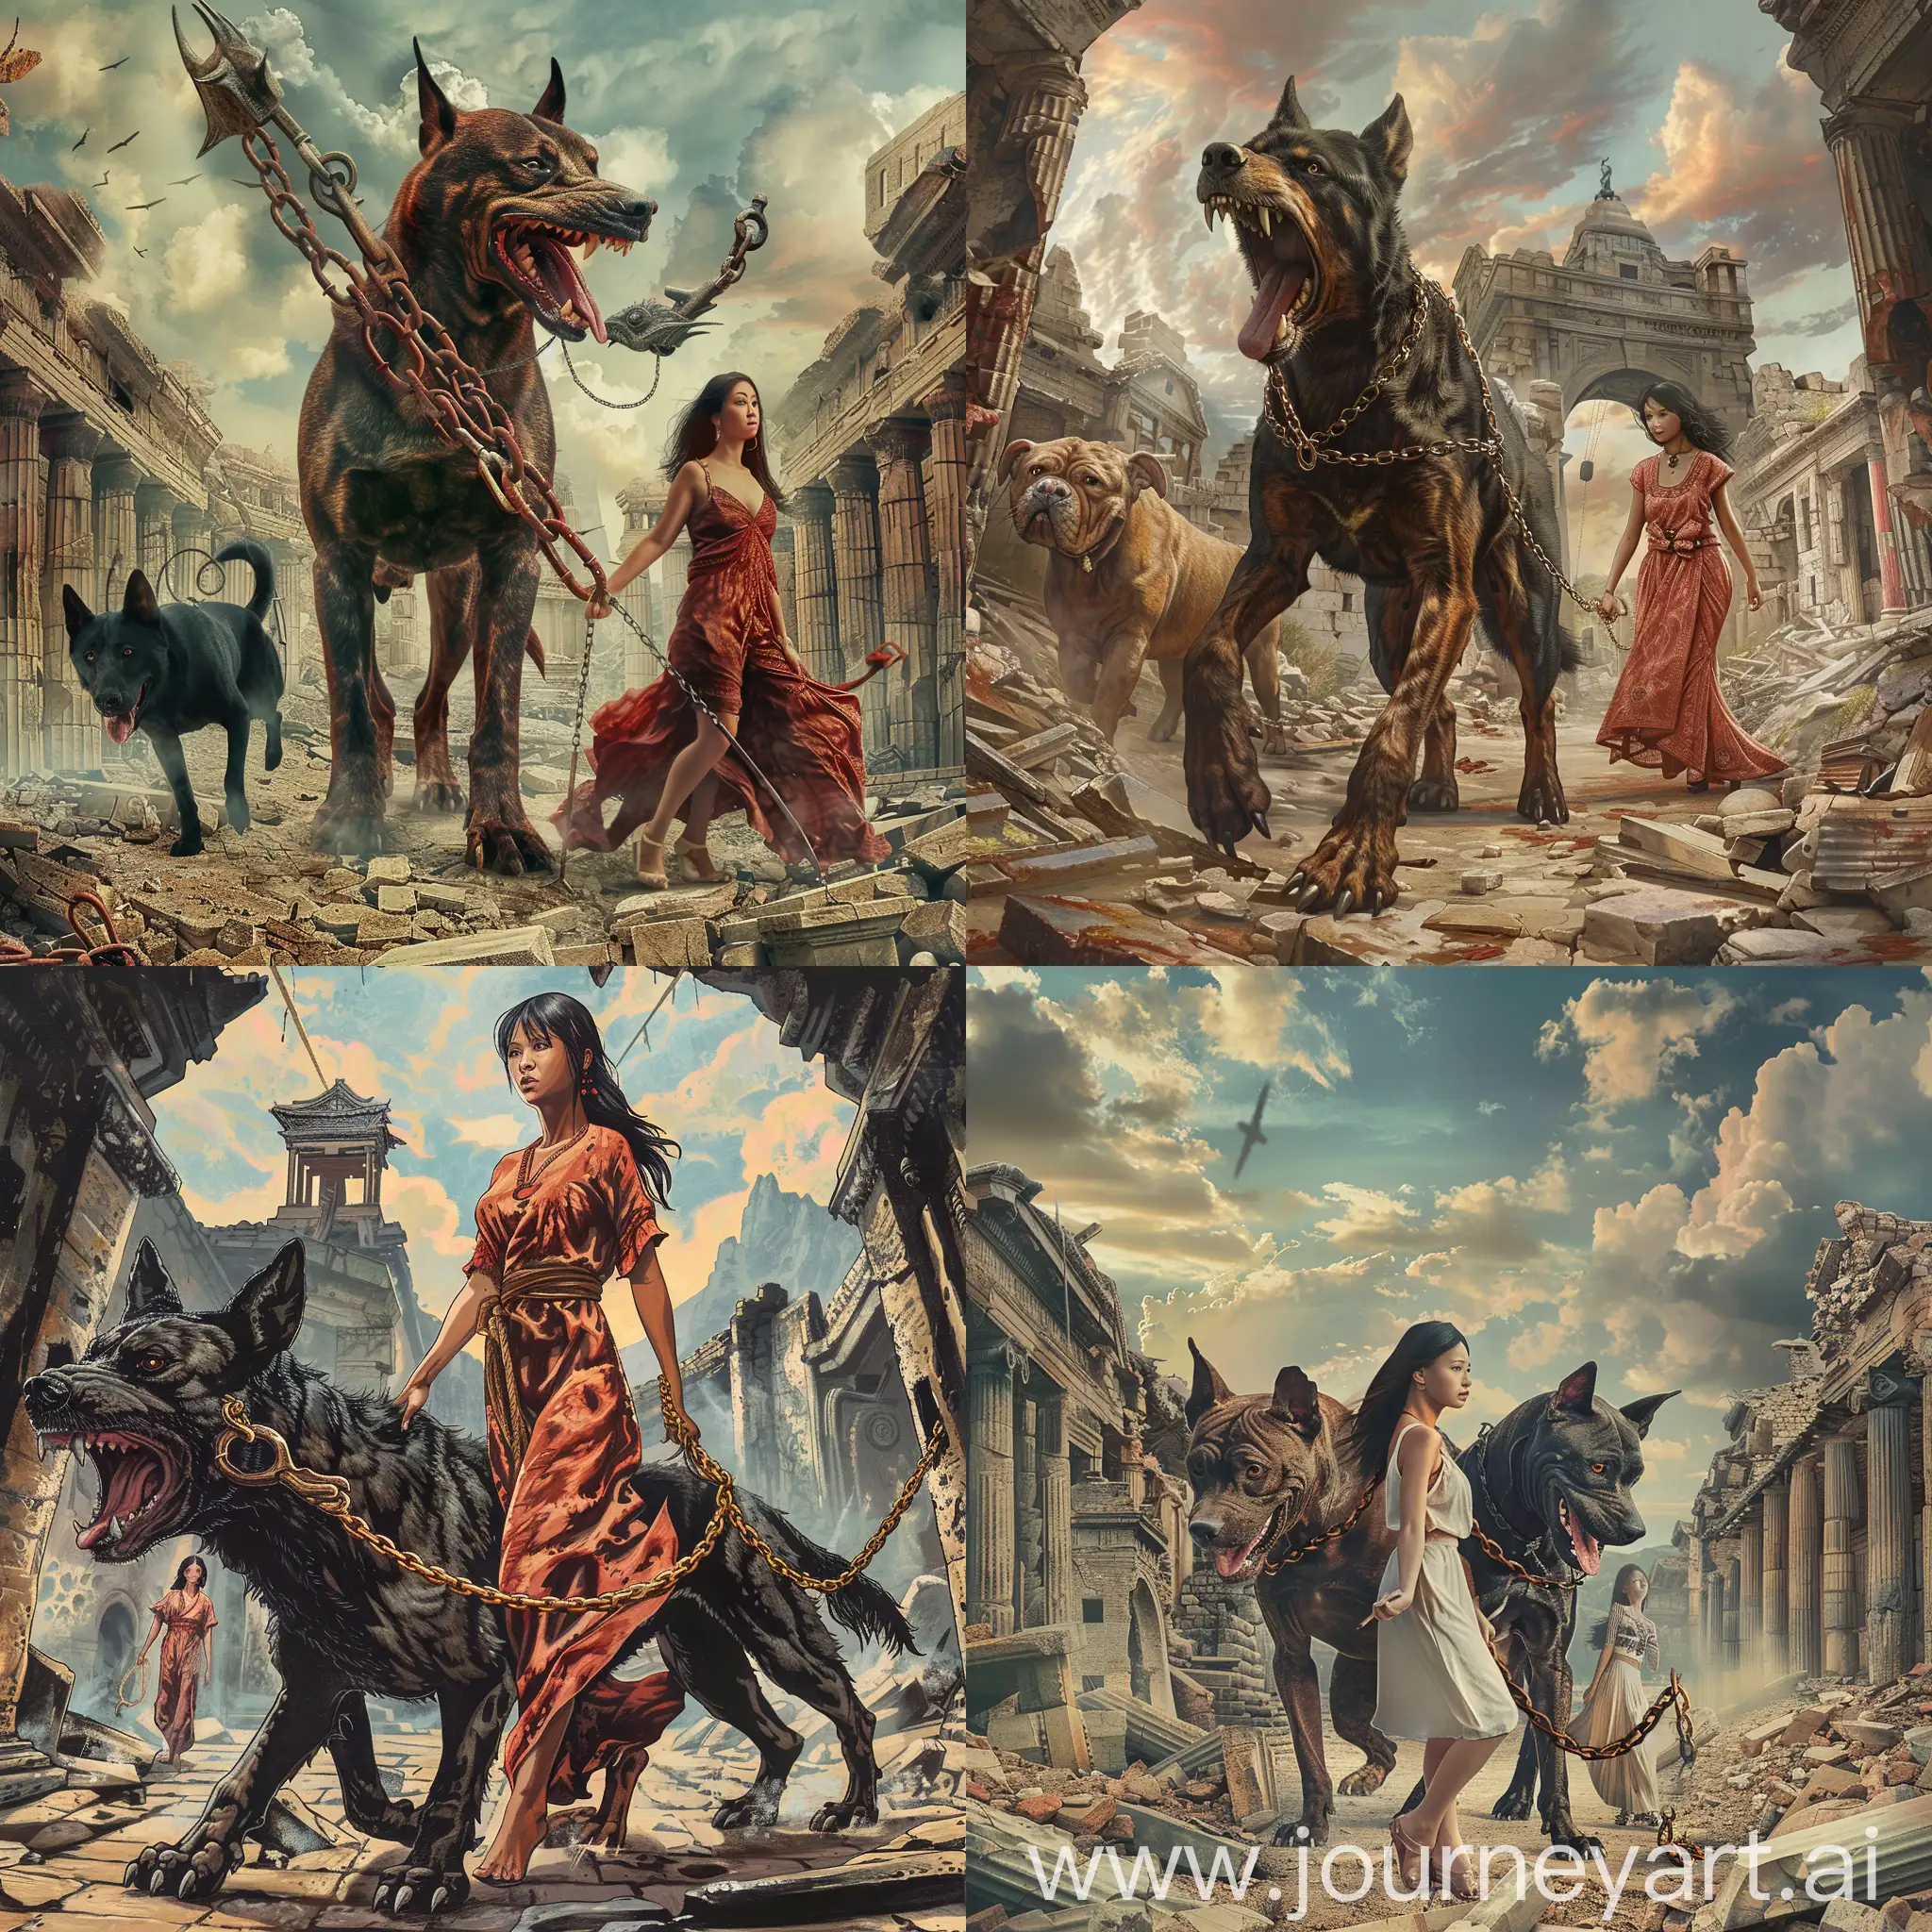 Mythical-Cerberus-Guarded-by-Beautiful-Asian-Woman-Amid-Ruined-Ruins